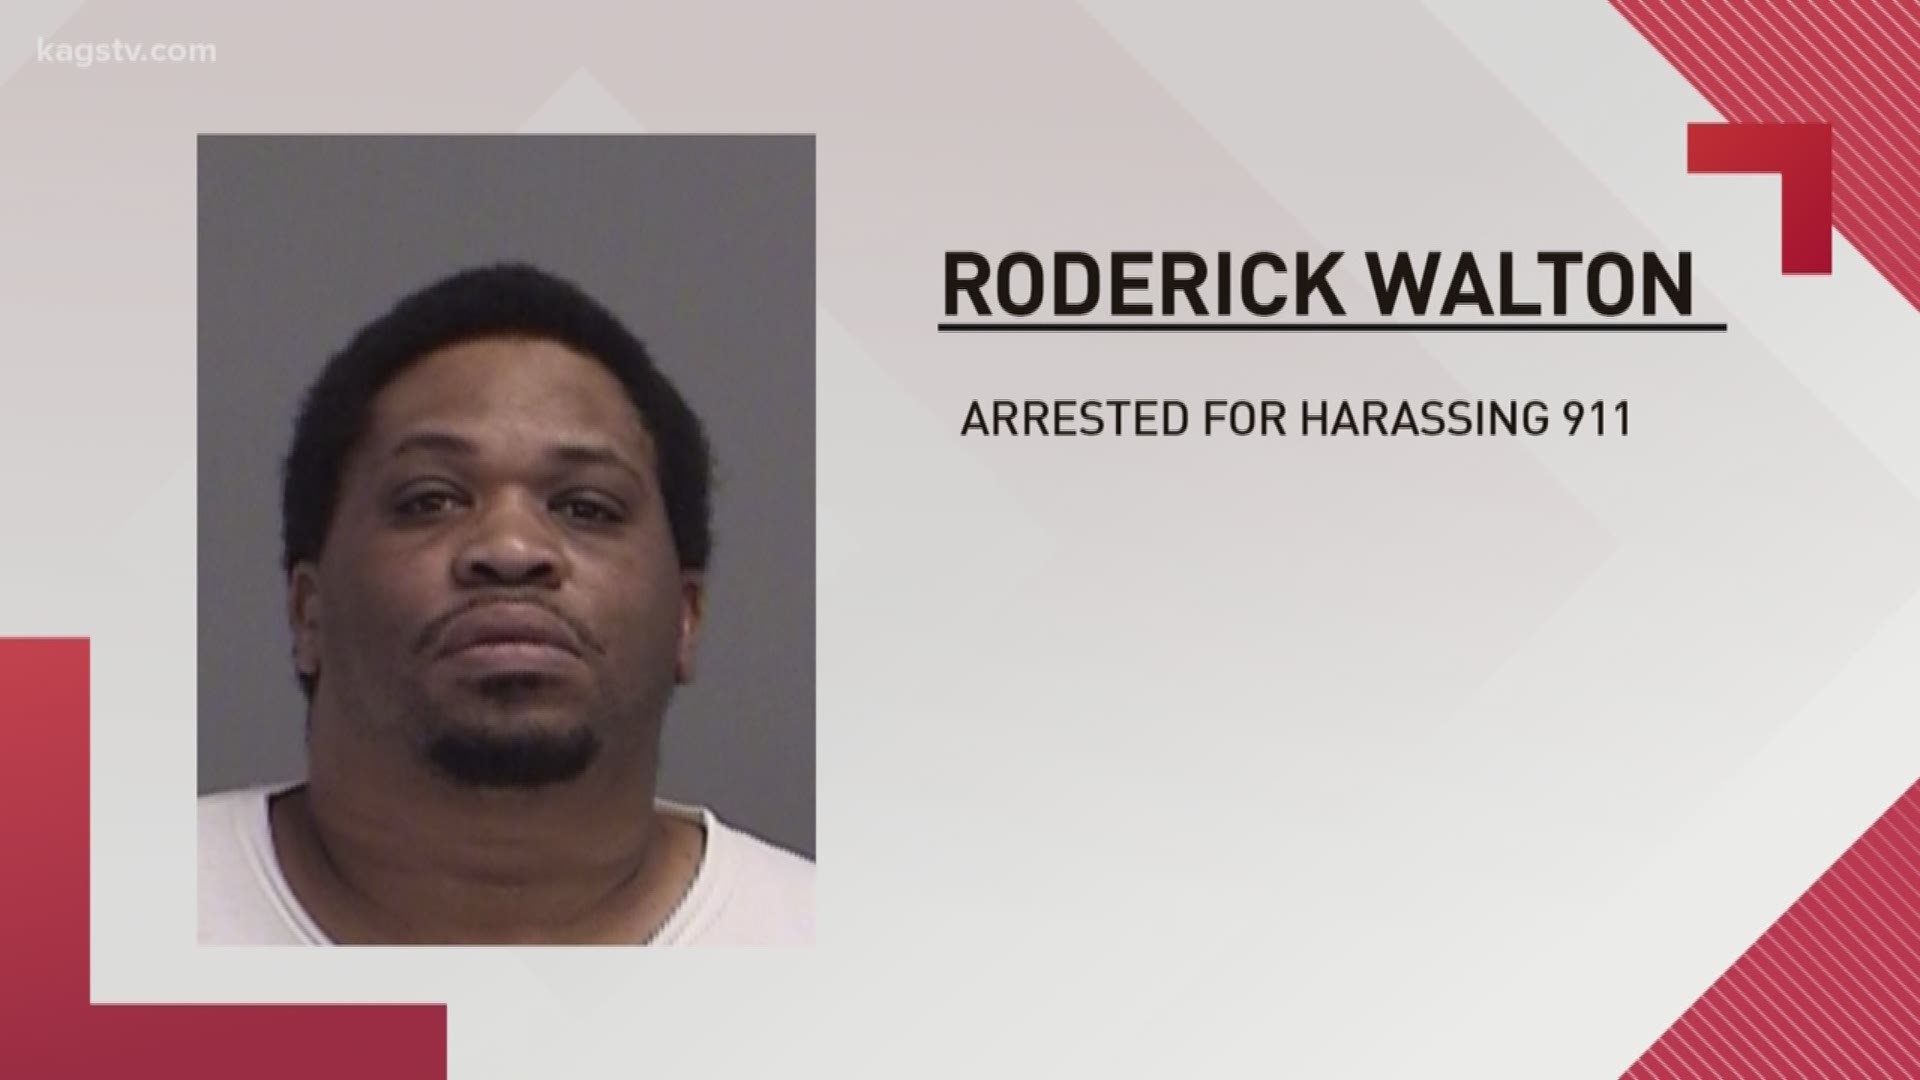 Police say the county 911 call center was tied up this morning due to Roderick Walton, who sent pornographic images and lewd texts to the county's non-emergency 911 number.